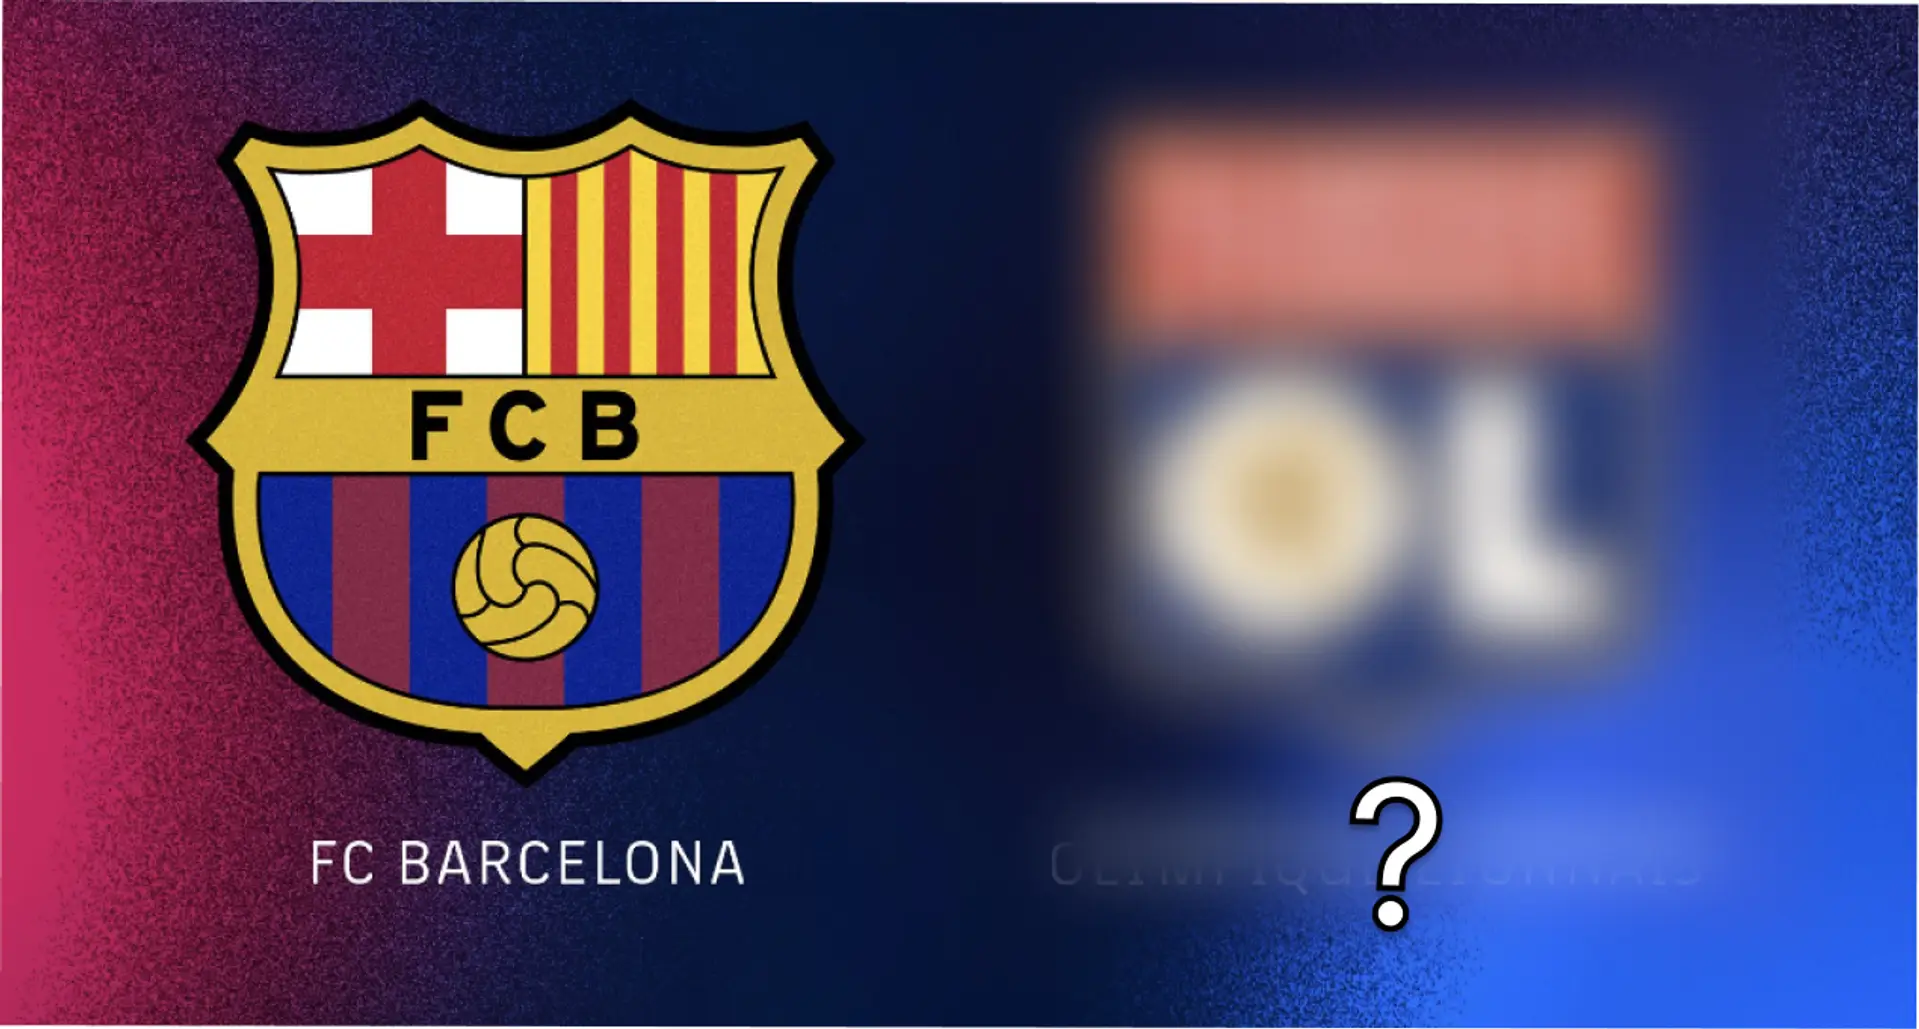 Who will Barca Femeni be facing in Champions League final?